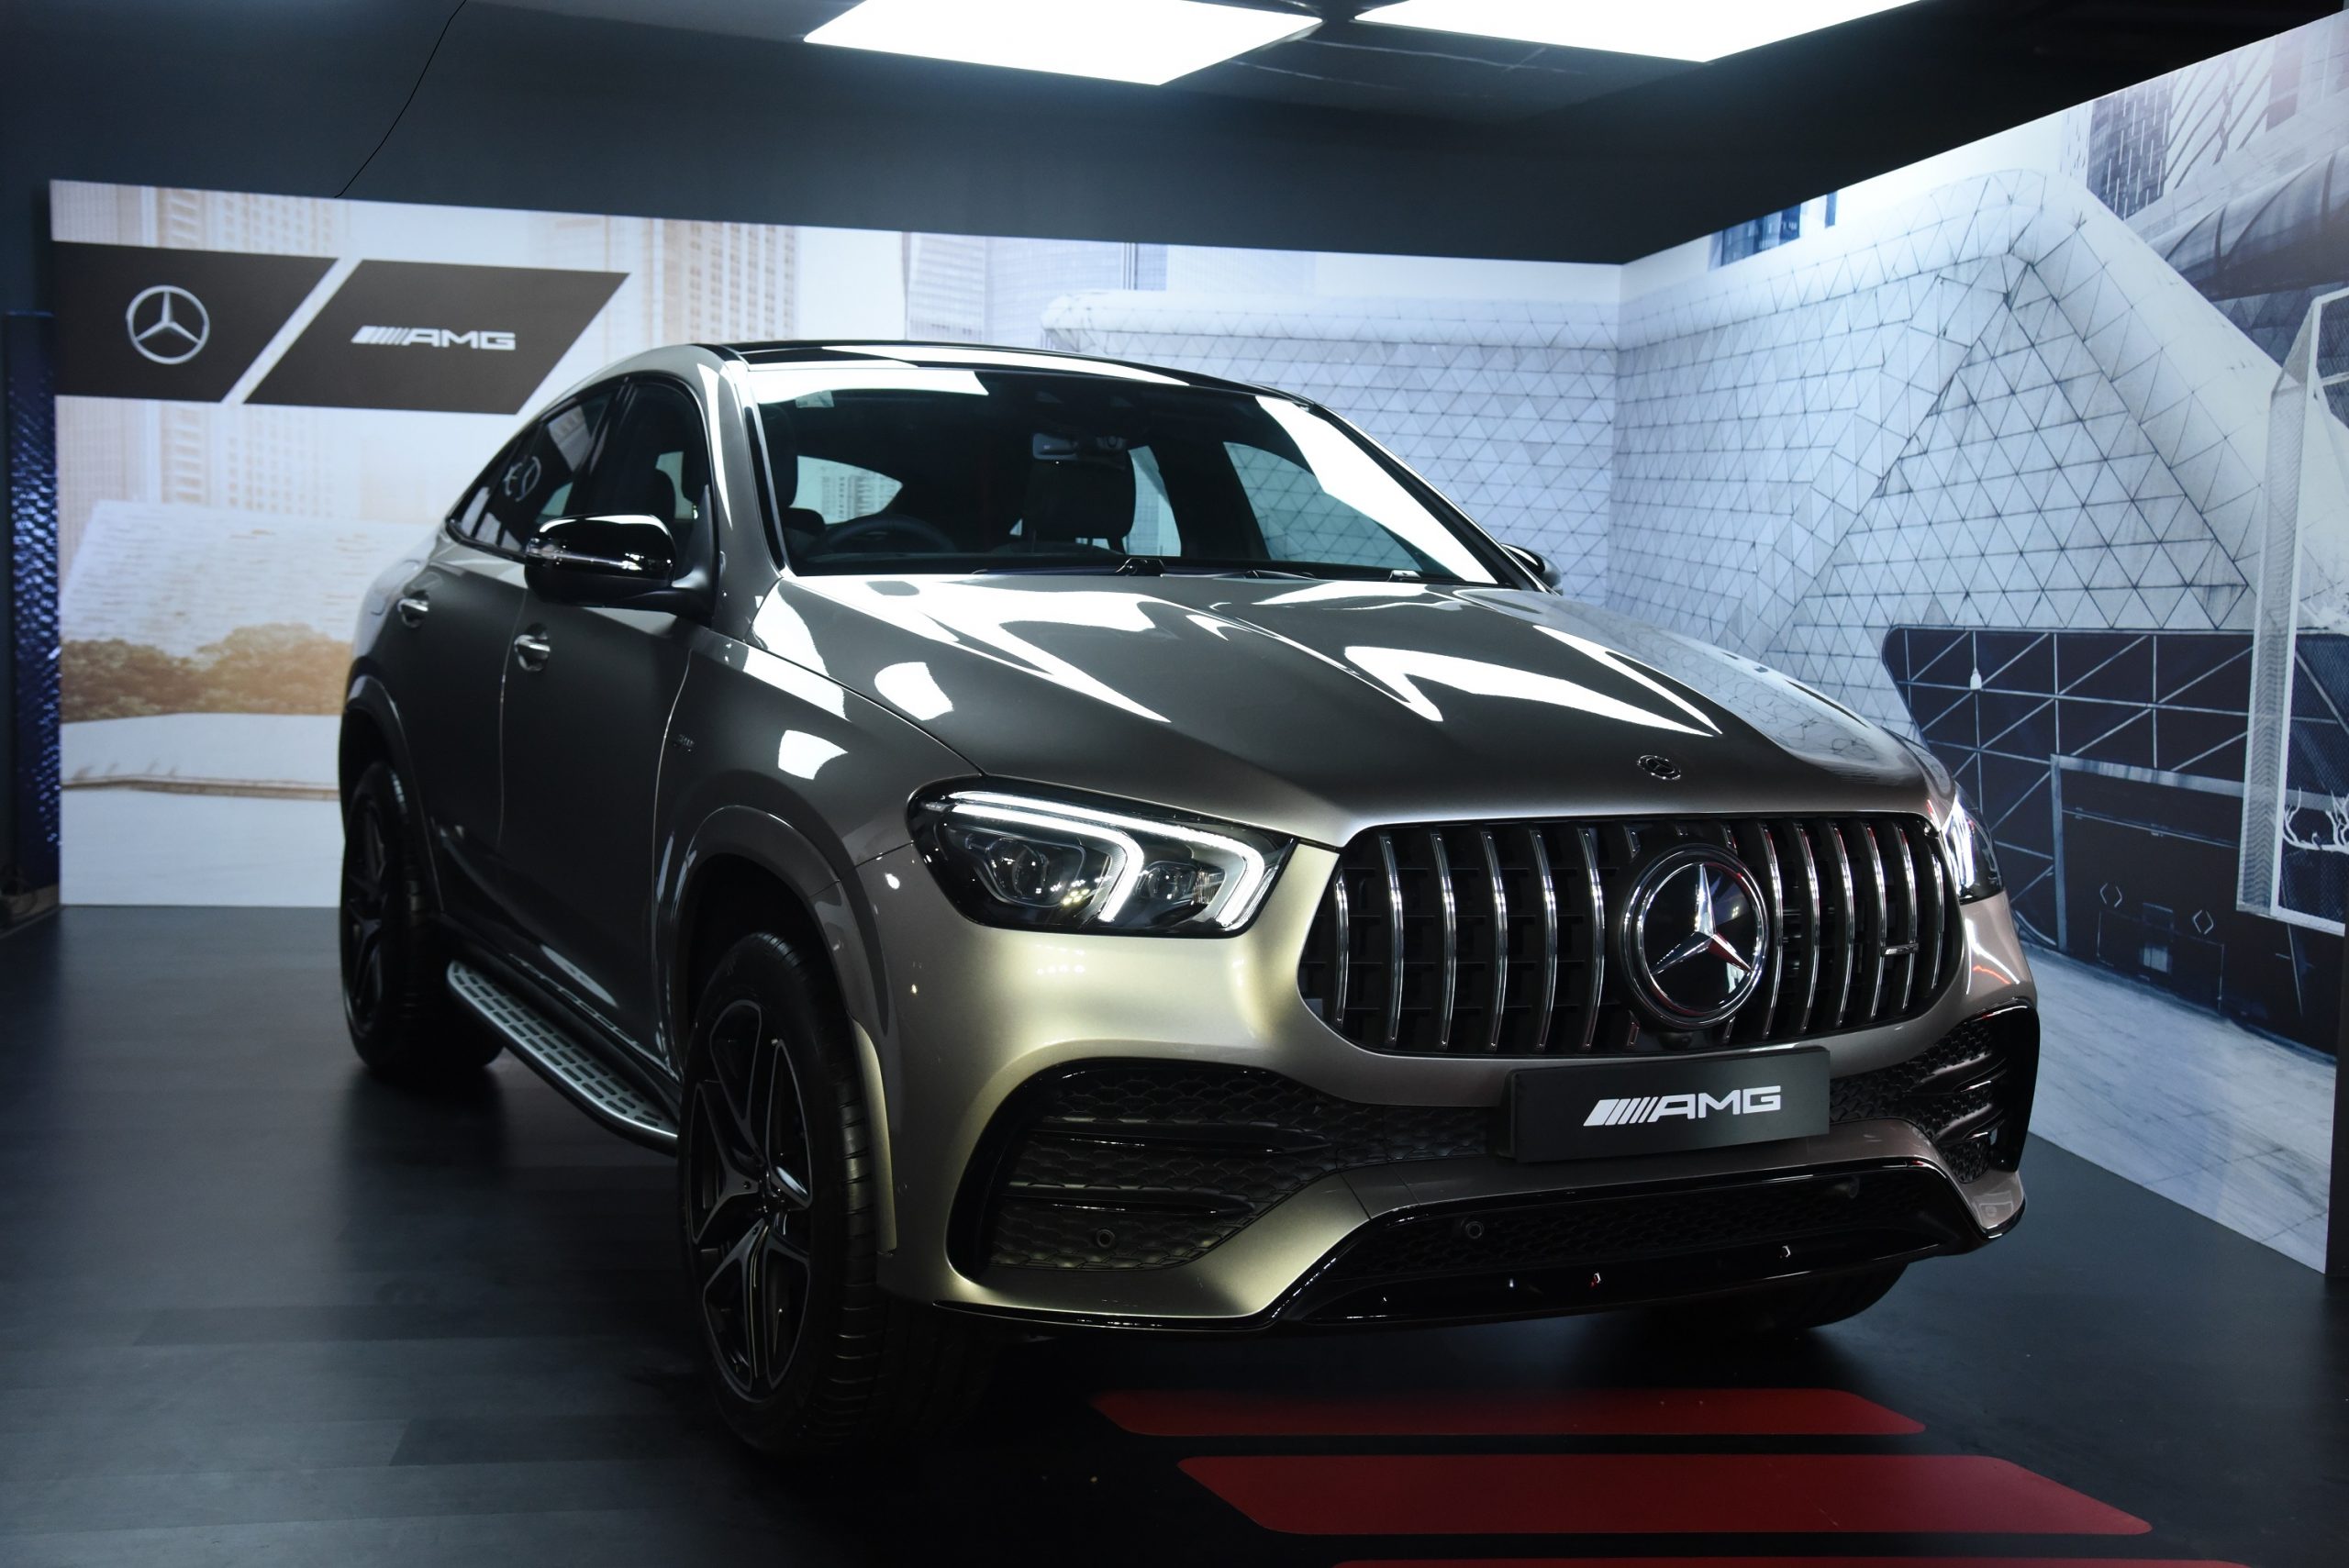 Mercedes-Benz launches the AMG GLE 53 series at Rs 1.2 crore in India